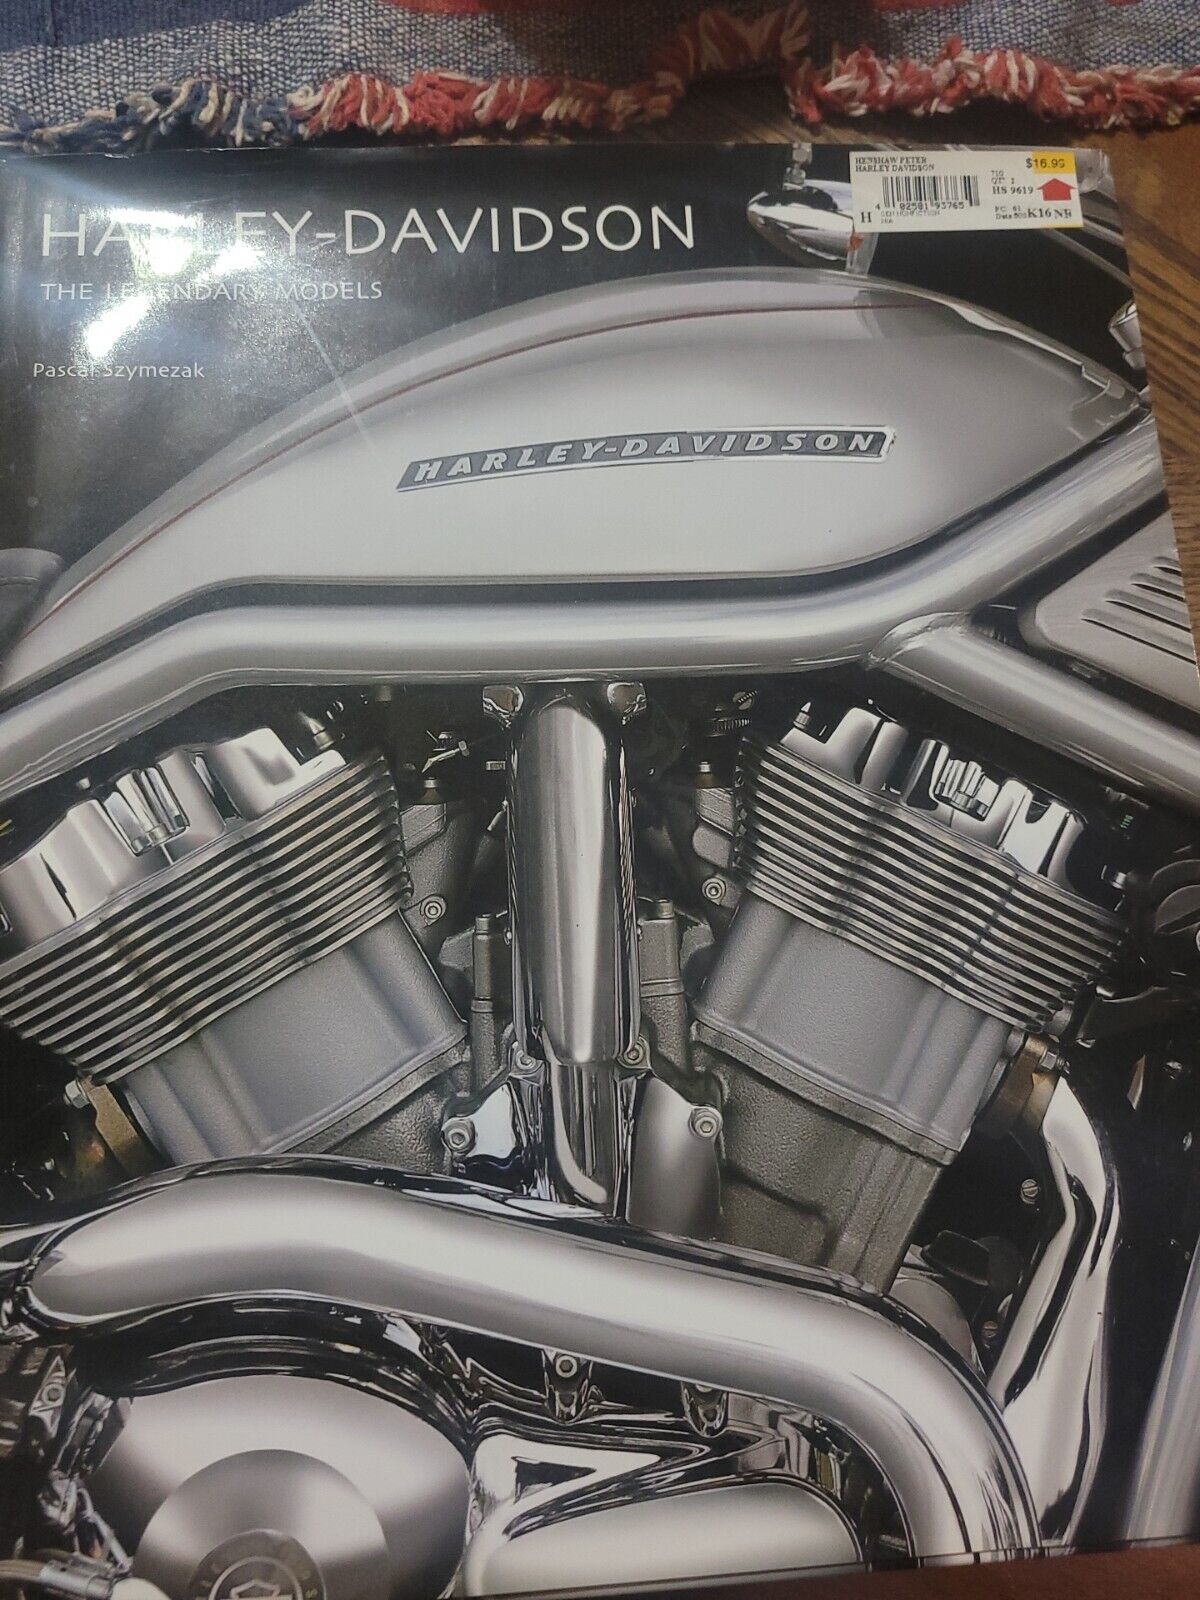 Vgt HARLEY DAVIDSON THE LEGENDARY MODELS BOOK Motorcycles Beautiful pictures